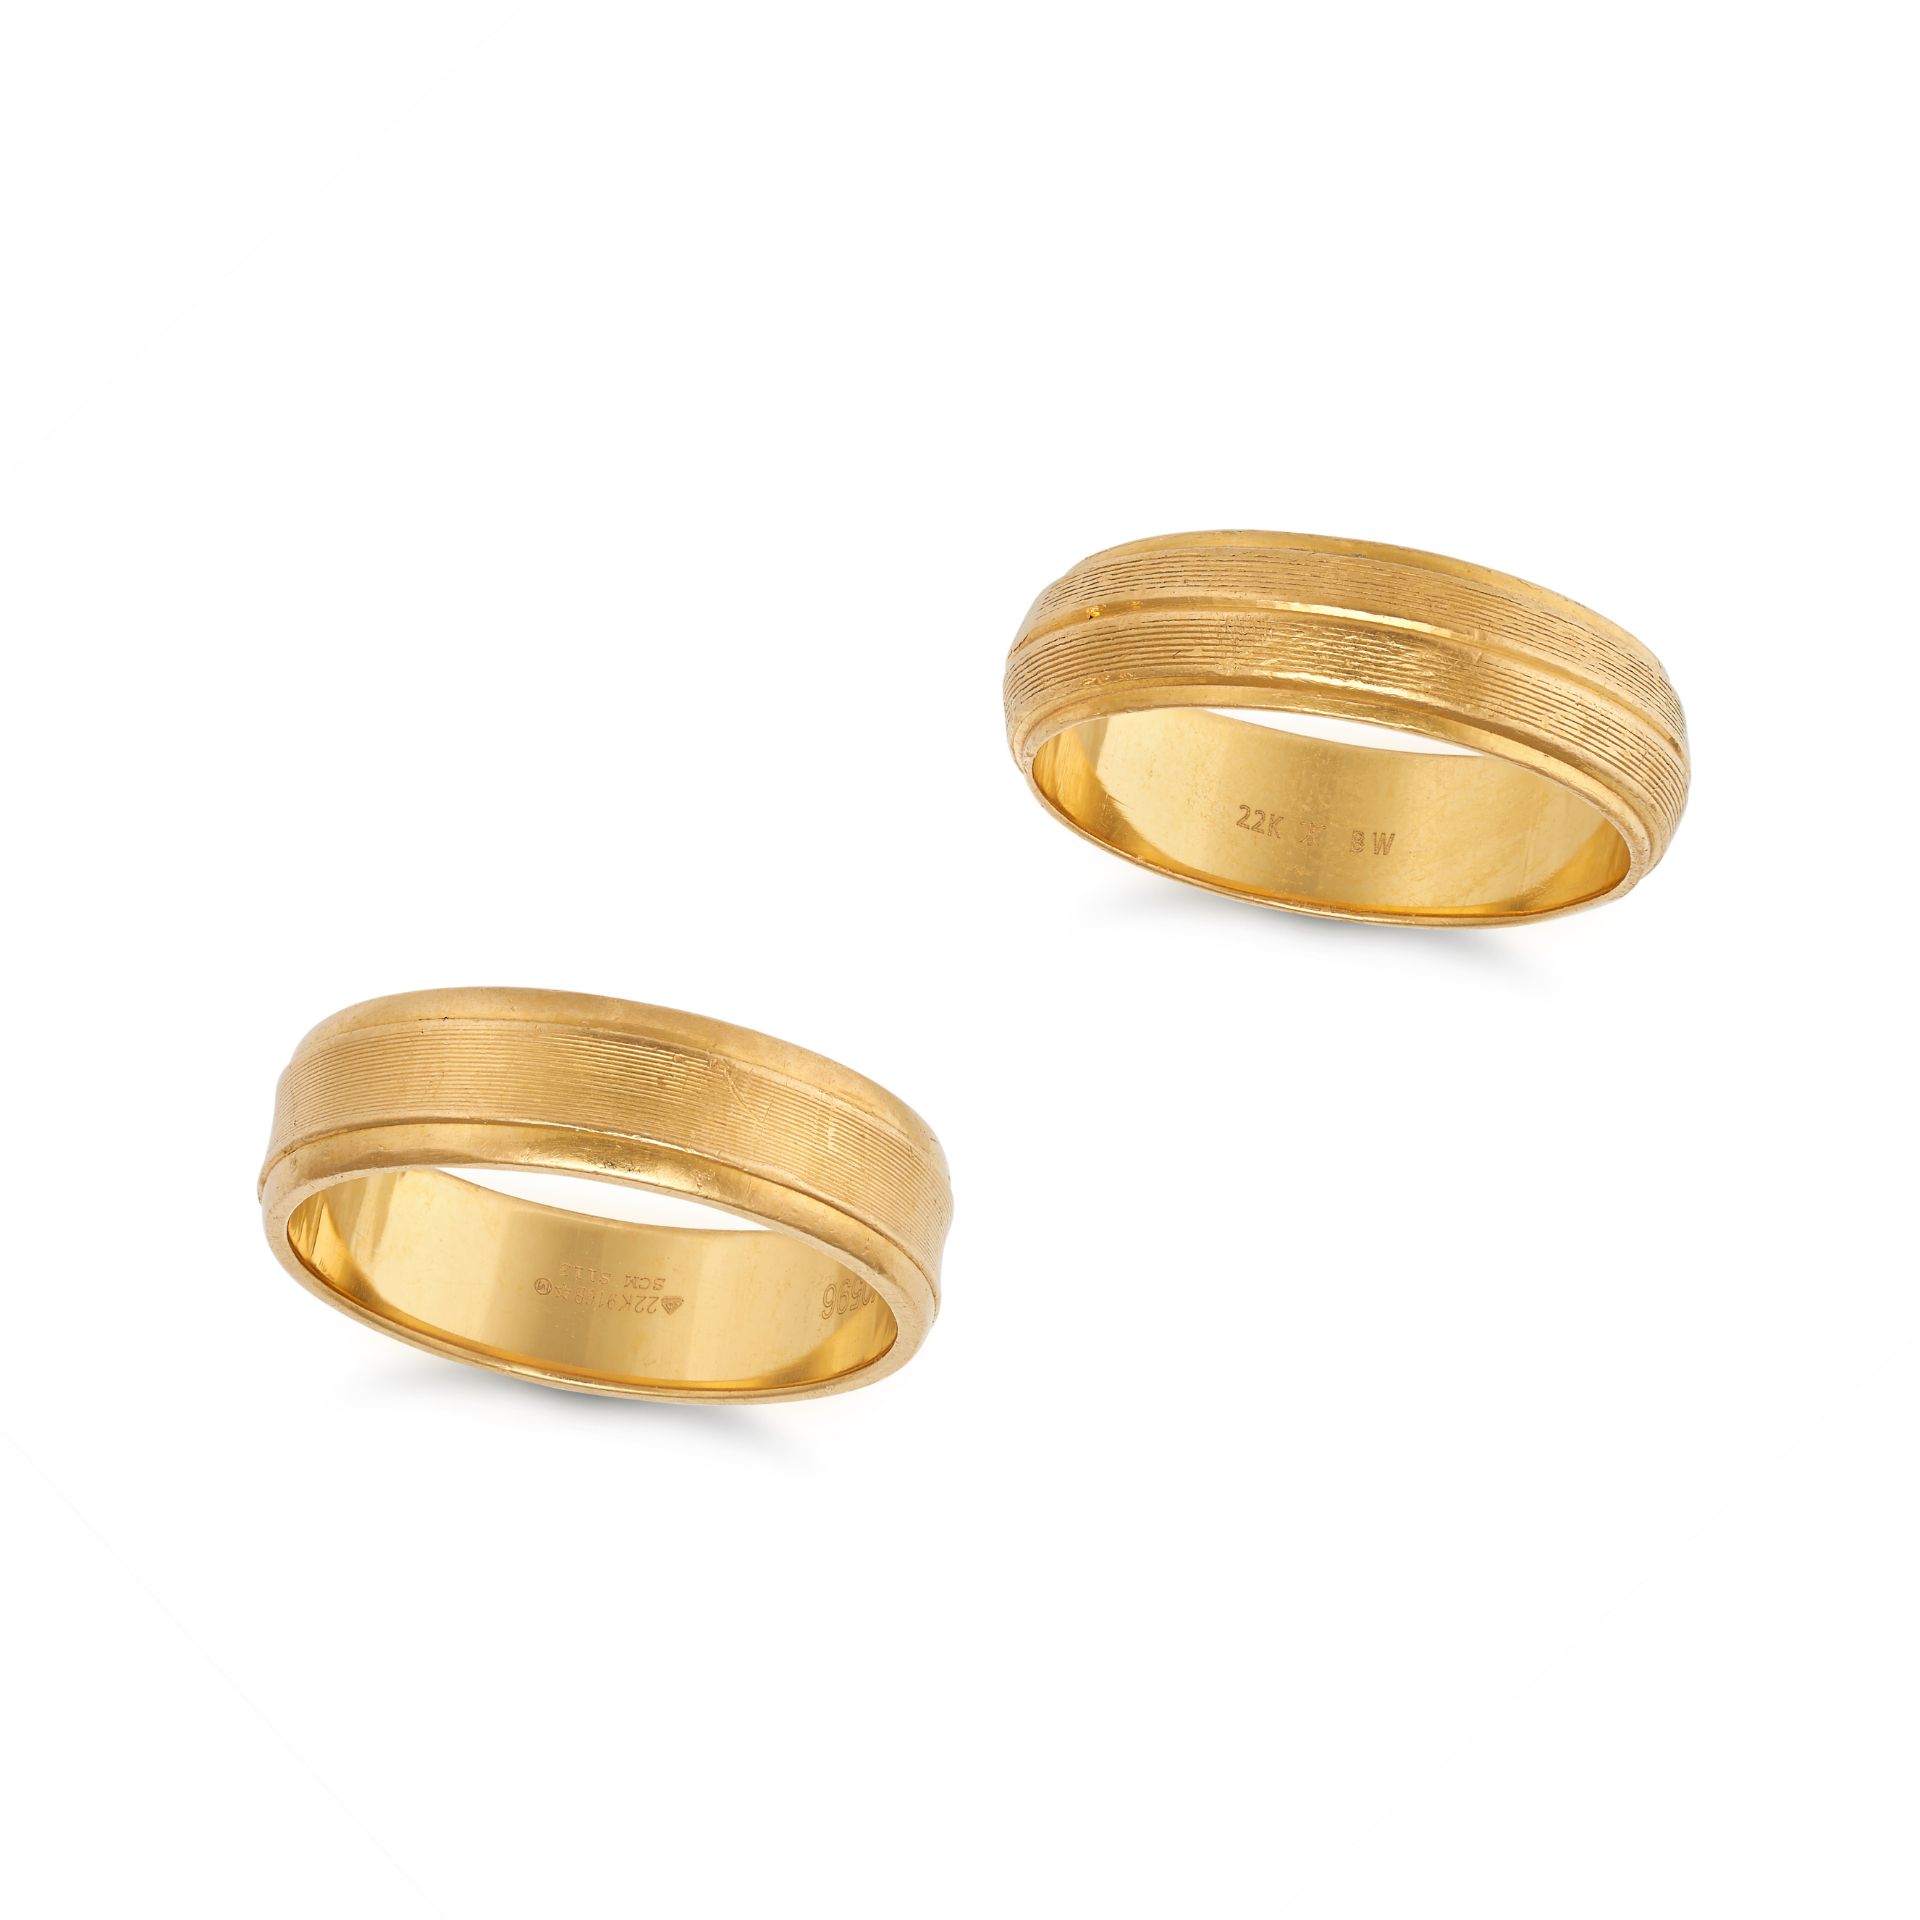 A PAIR OF GOLD BAND RINGS in 22ct yellow gold, one ring stamped 22K, size S / 9.25, the other rin...